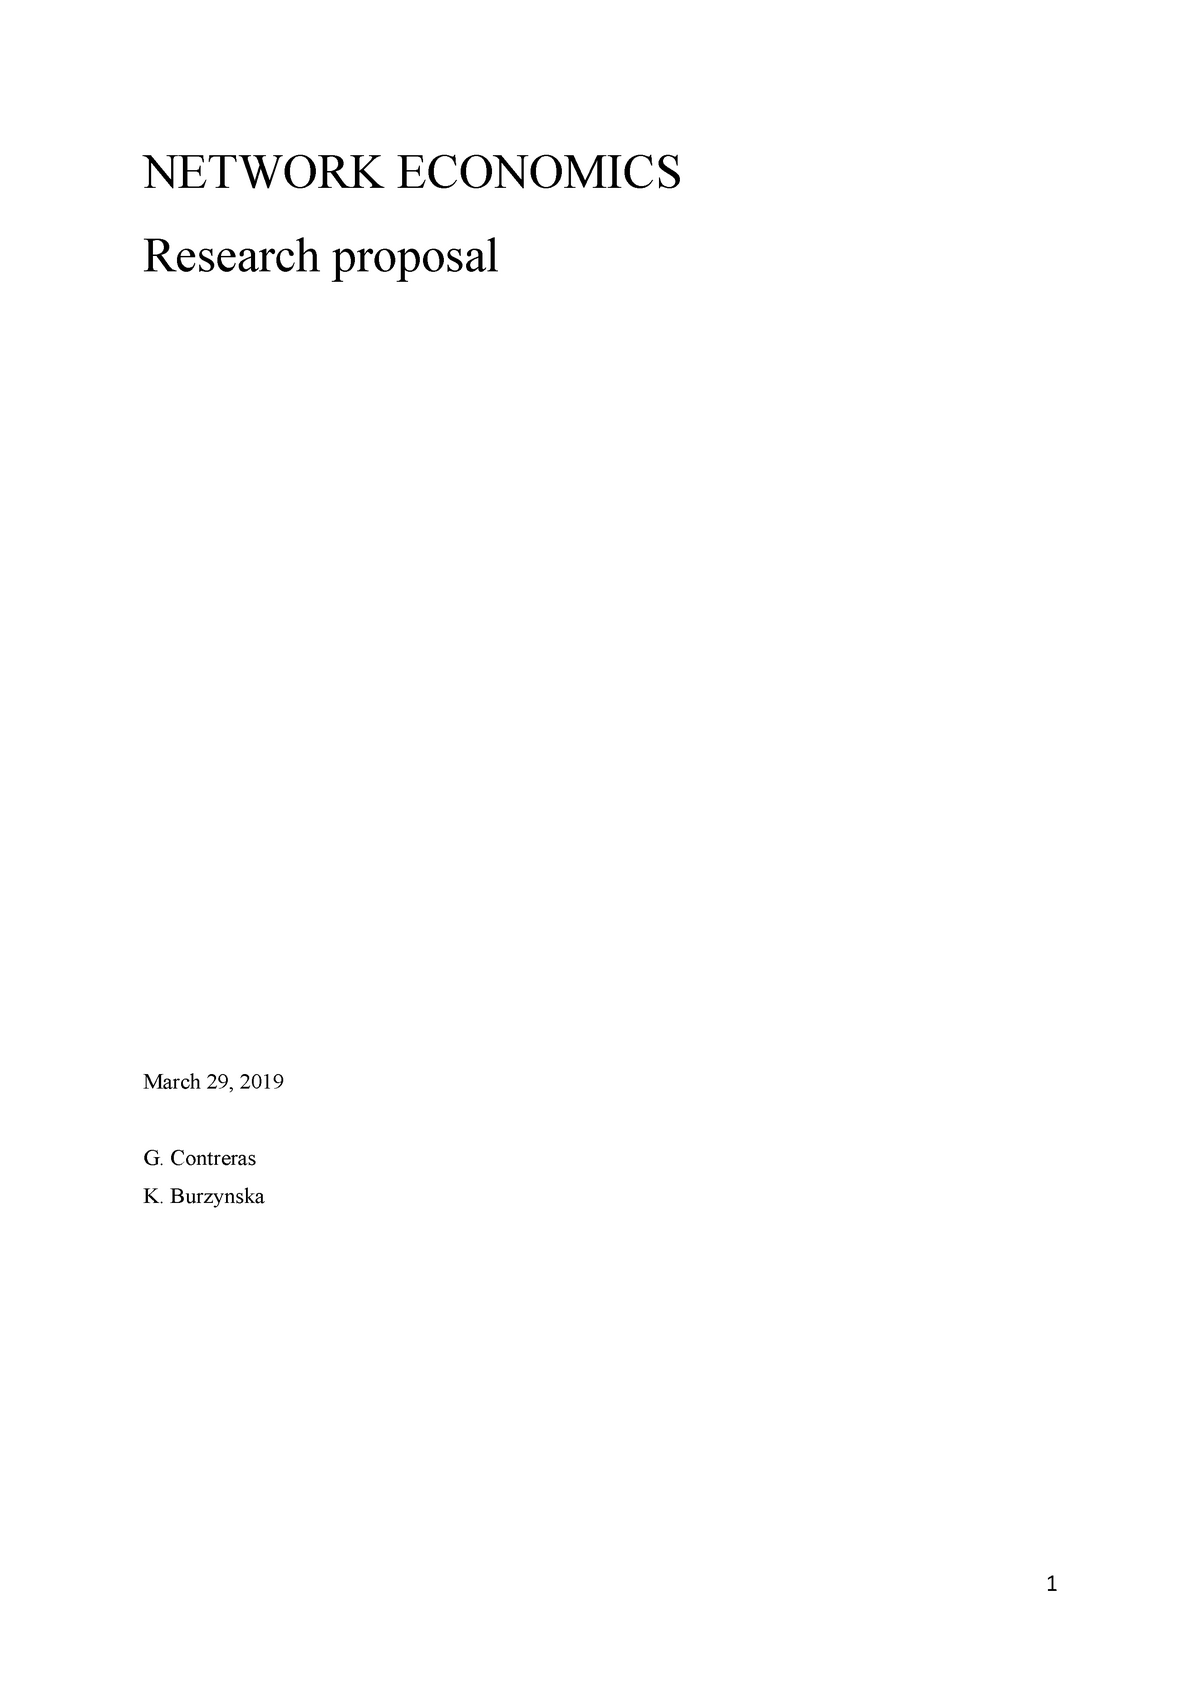 research proposal related to economics